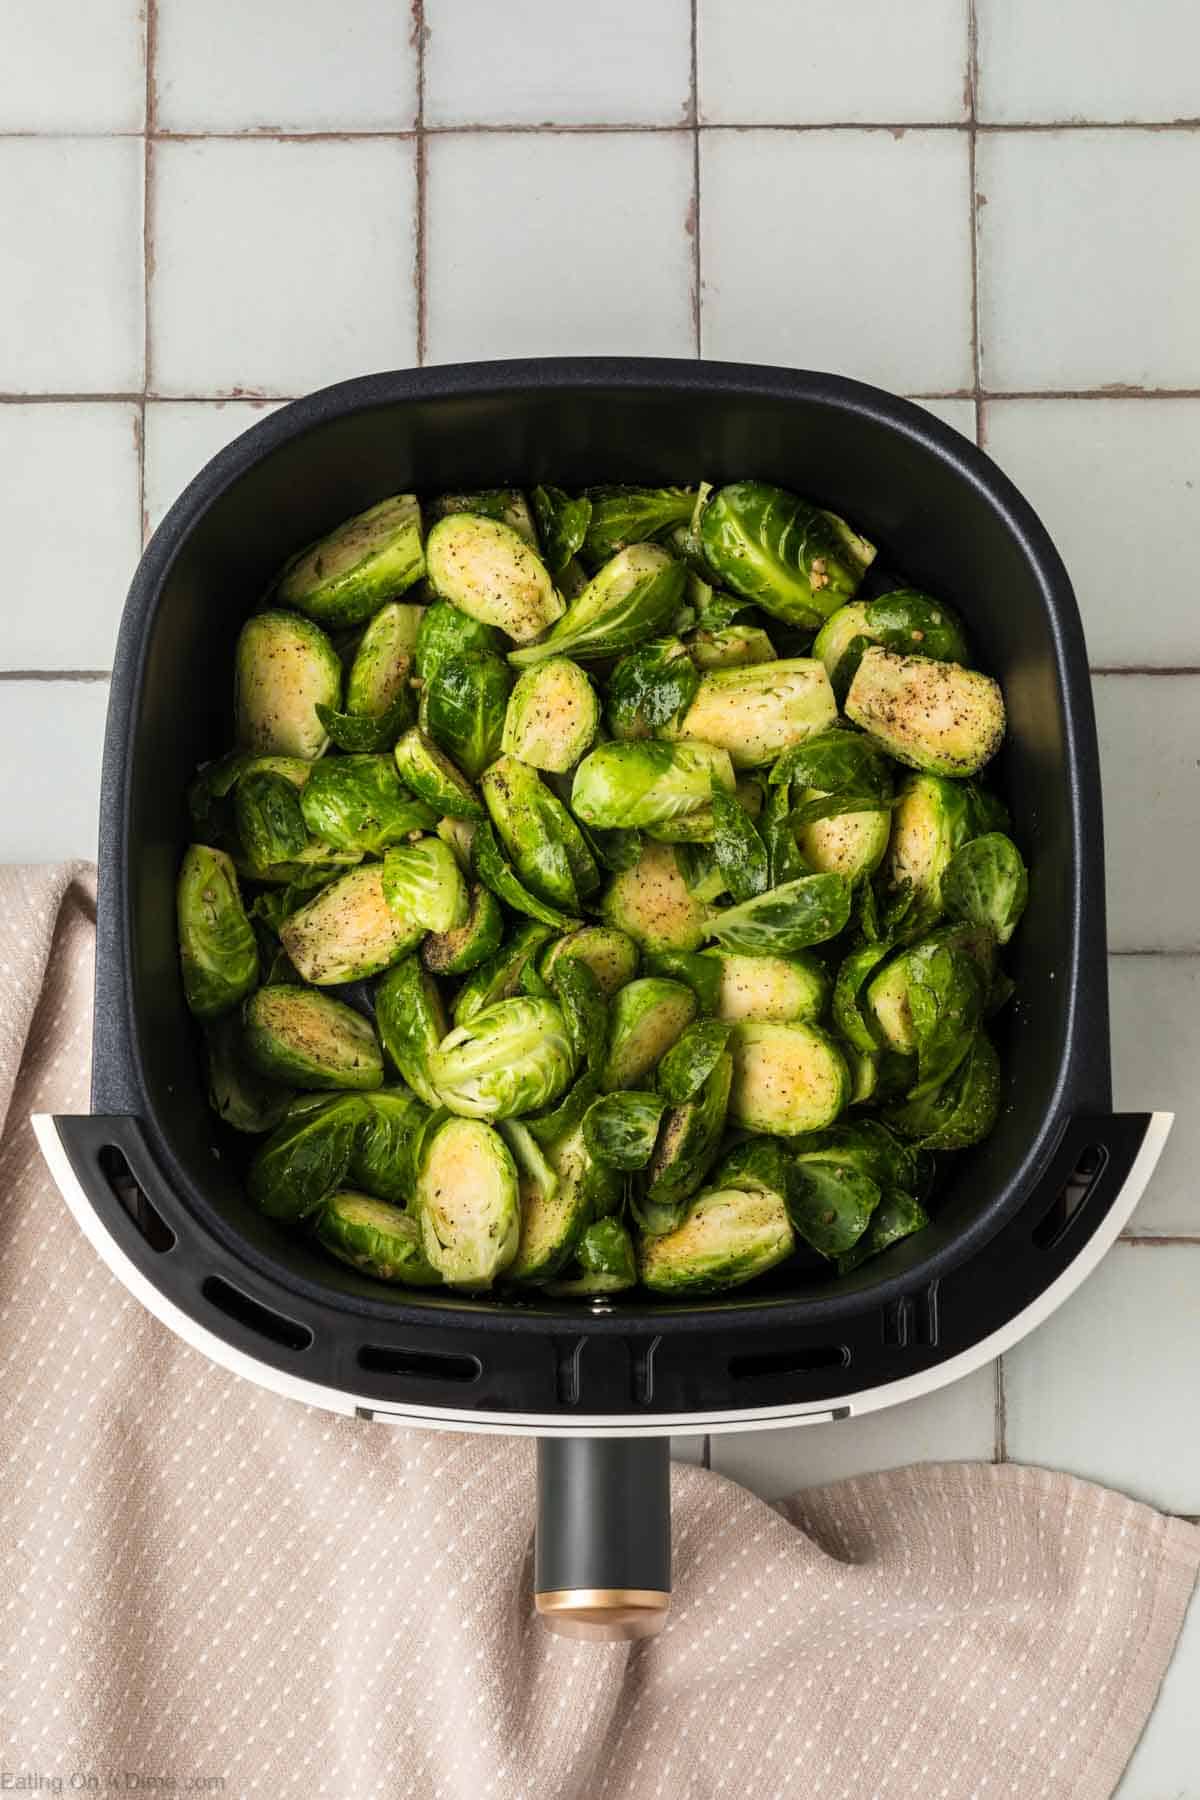 An air fryer basket filled with seasoned Brussels sprouts sits on a tiled countertop, suggesting a delicious air fryer Brussels sprouts recipe. The air fryer rests on a beige cloth with small white polka dots. The Brussels sprouts appear fresh and ready to be roasted.